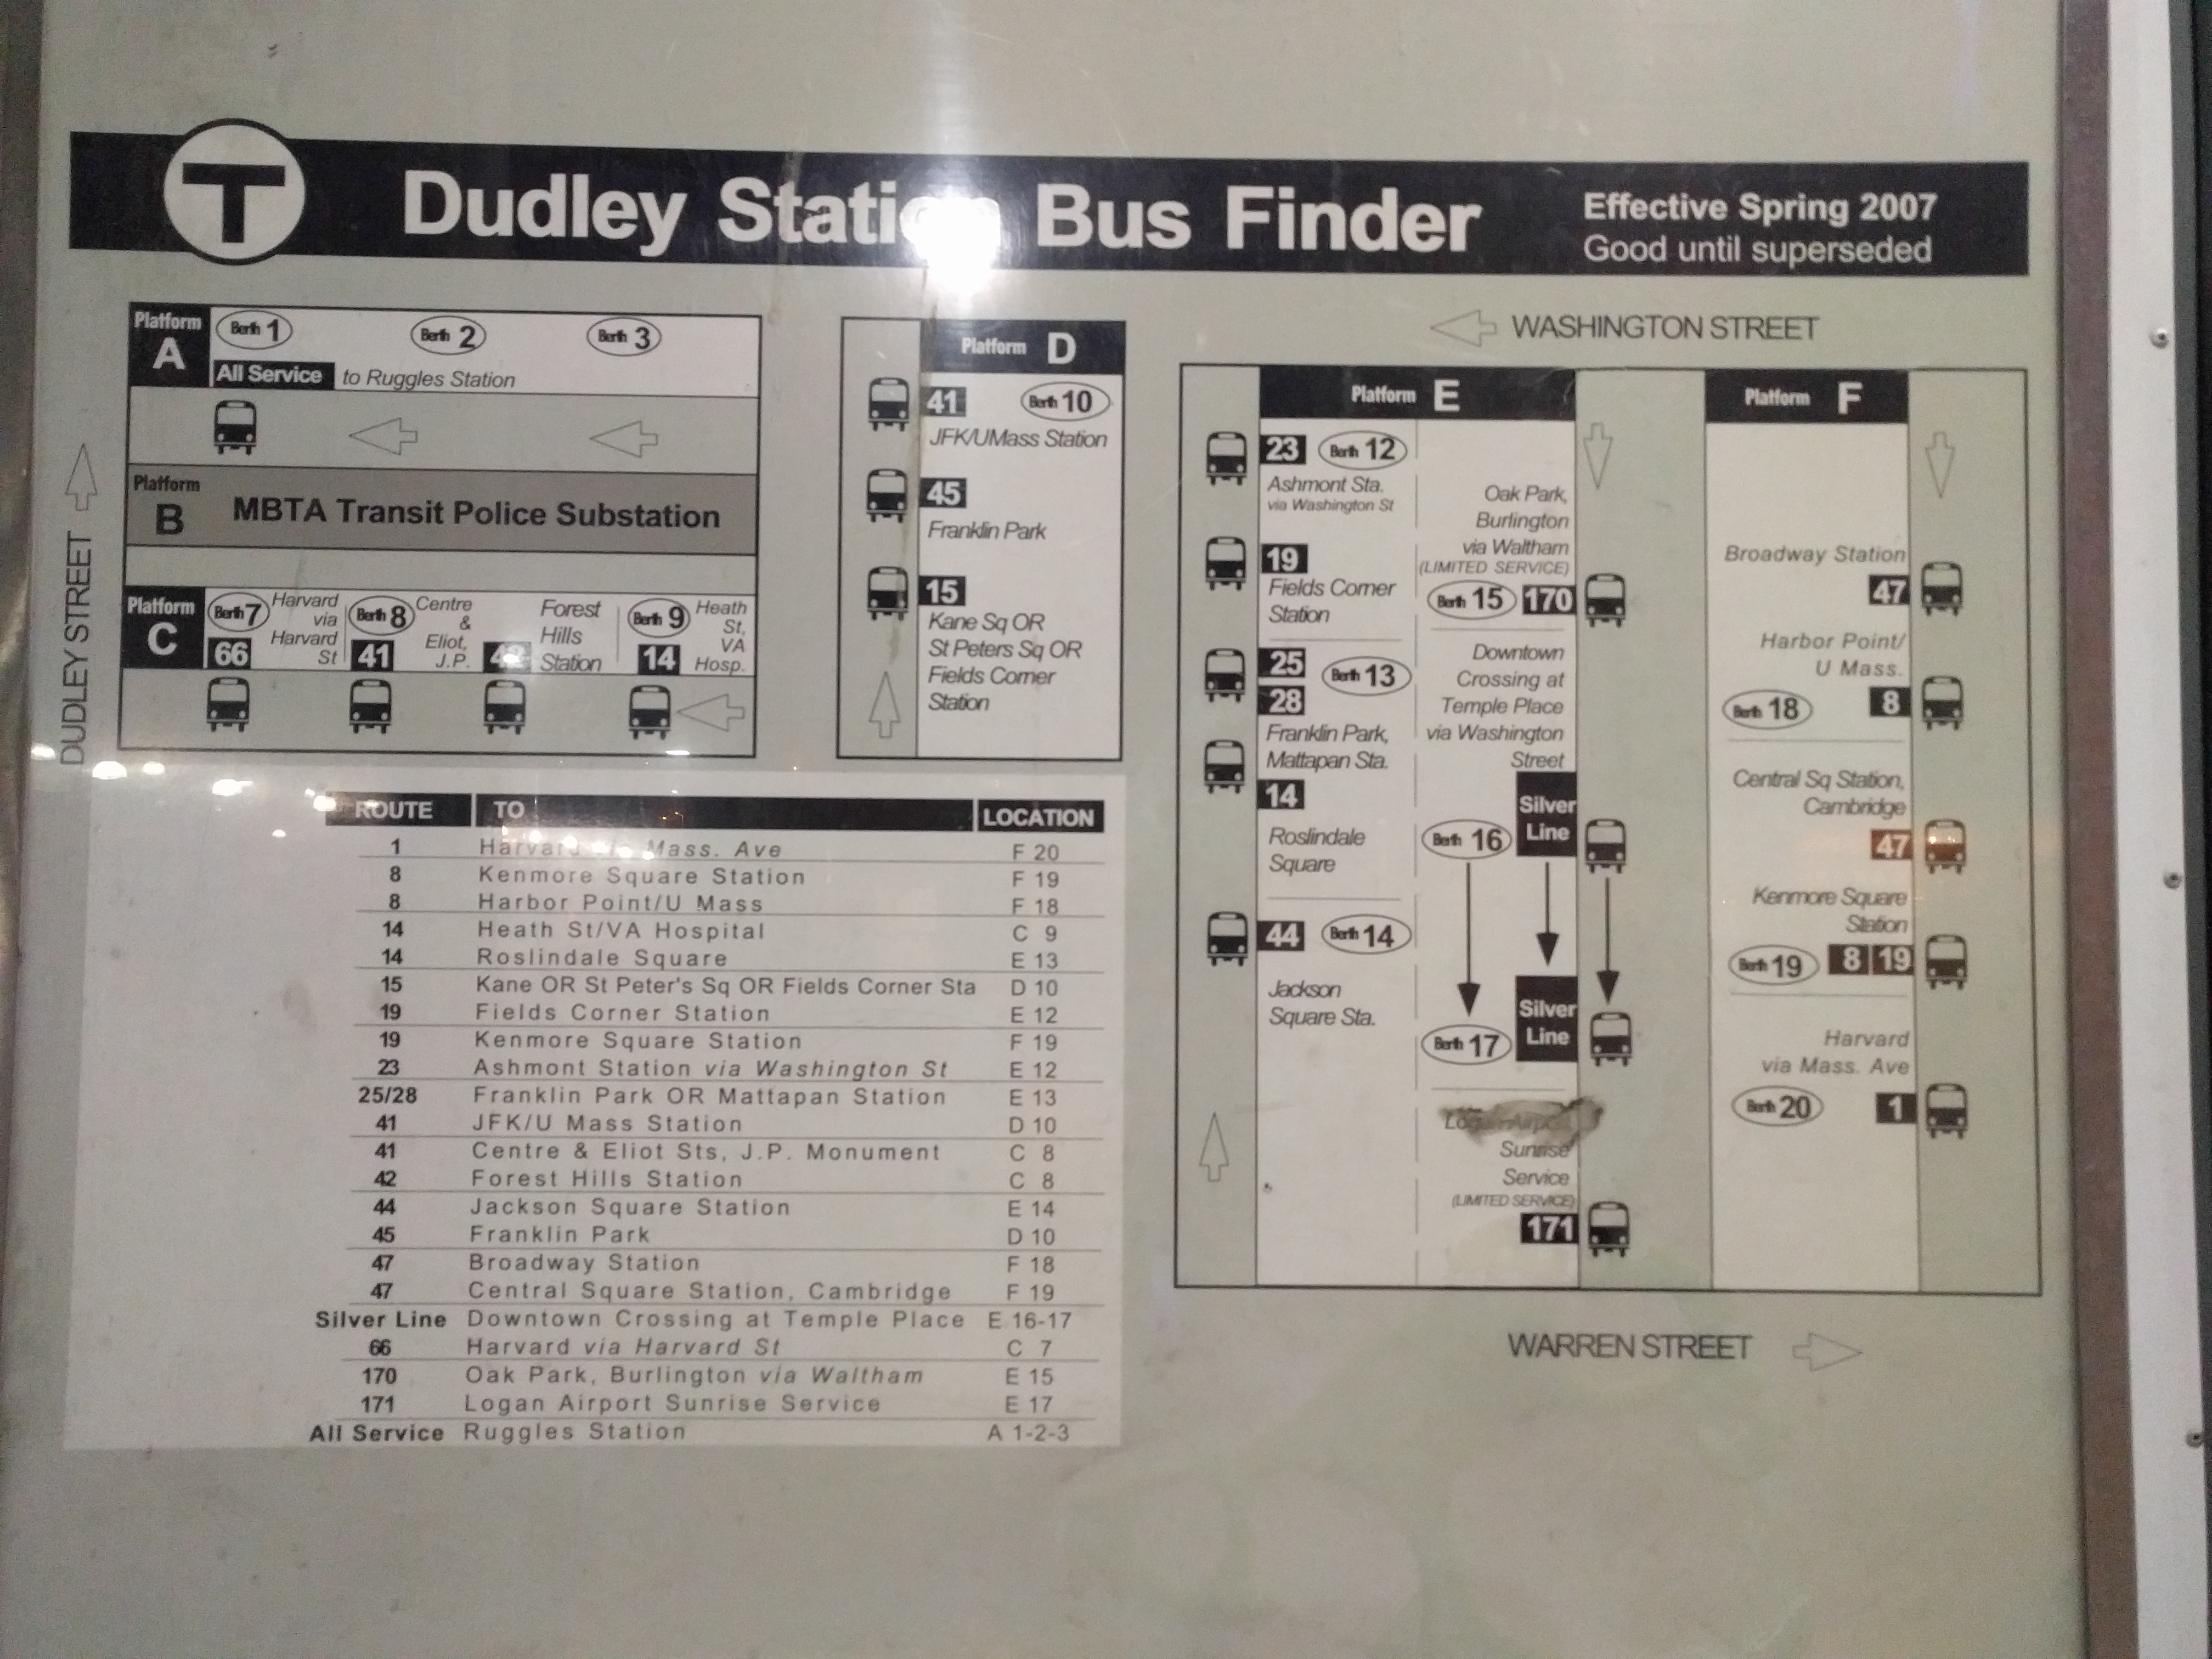 Photo of Dudley Station Bus Finder poster from 2007